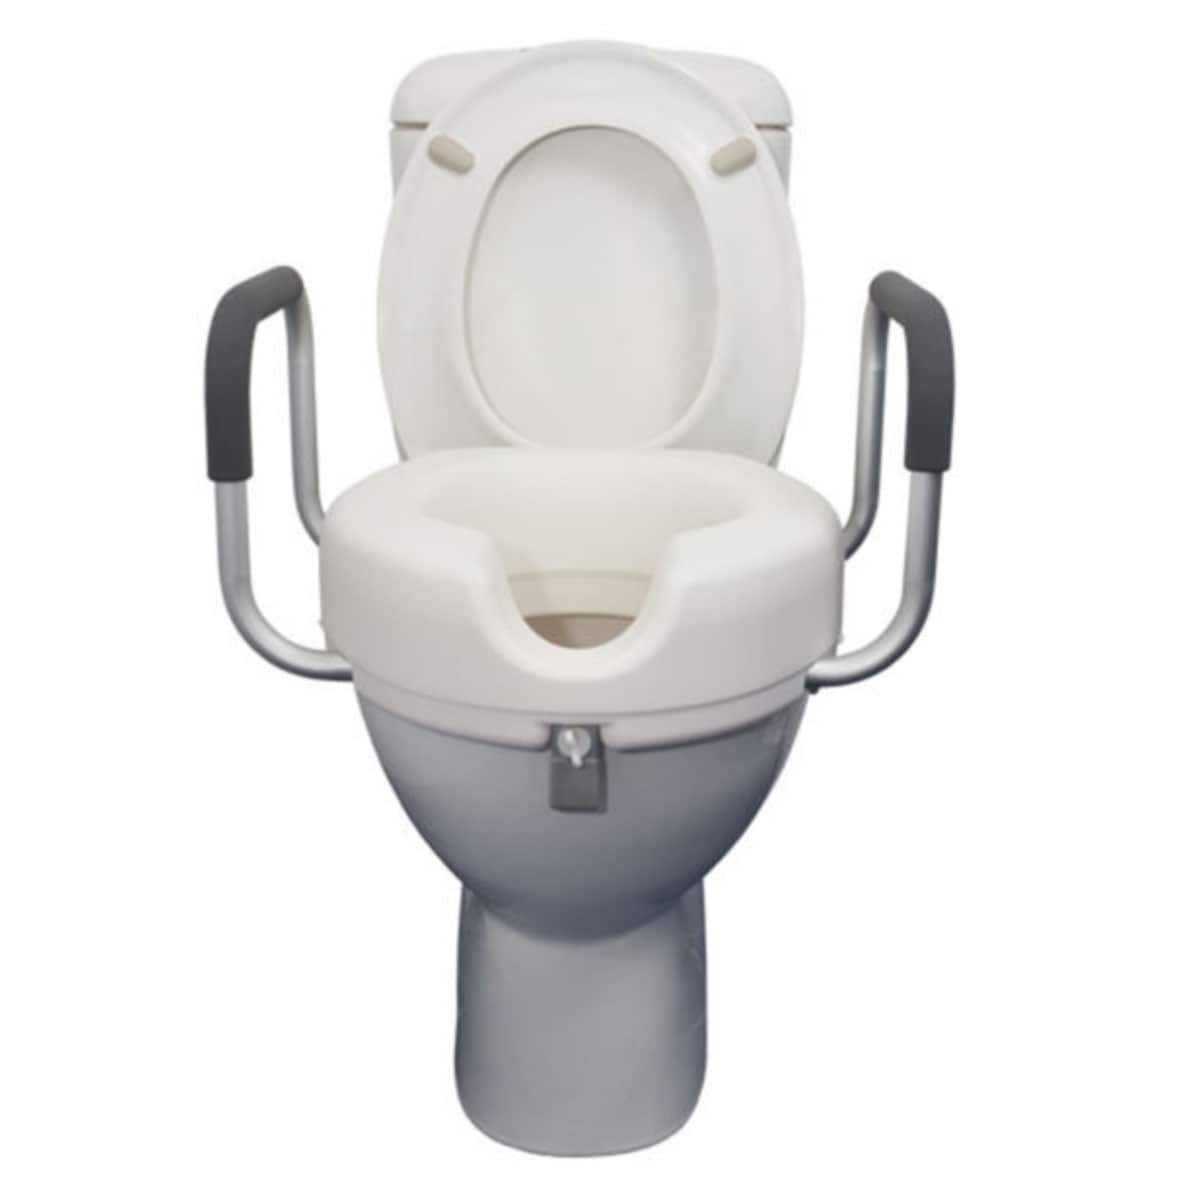 Safety & Mobility Raised Toilet Seat with Armrests 10cm